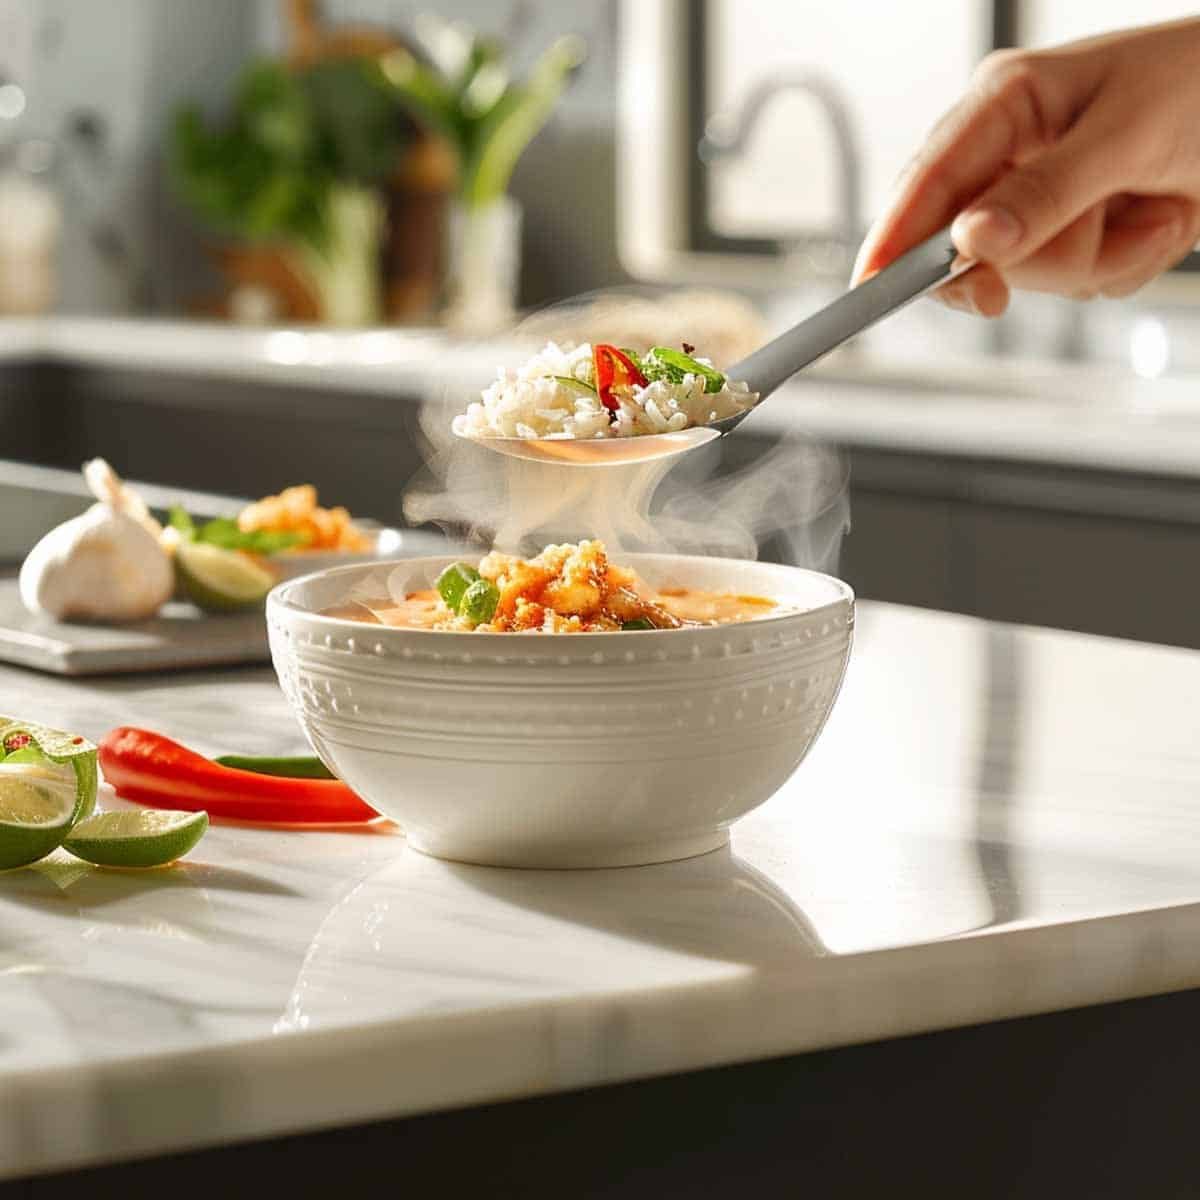 An image of a bowl of Thai Rice Soup (Khao Tom) being served, featuring a steaming, hearty broth filled with soft rice and tender pieces of chicken. The soup is being ladled into a traditional ceramic bowl, garnished with fresh green onions and cilantro on top. This scene captures the comforting and nourishing essence of this classic Thai dish, ready to be enjoyed.